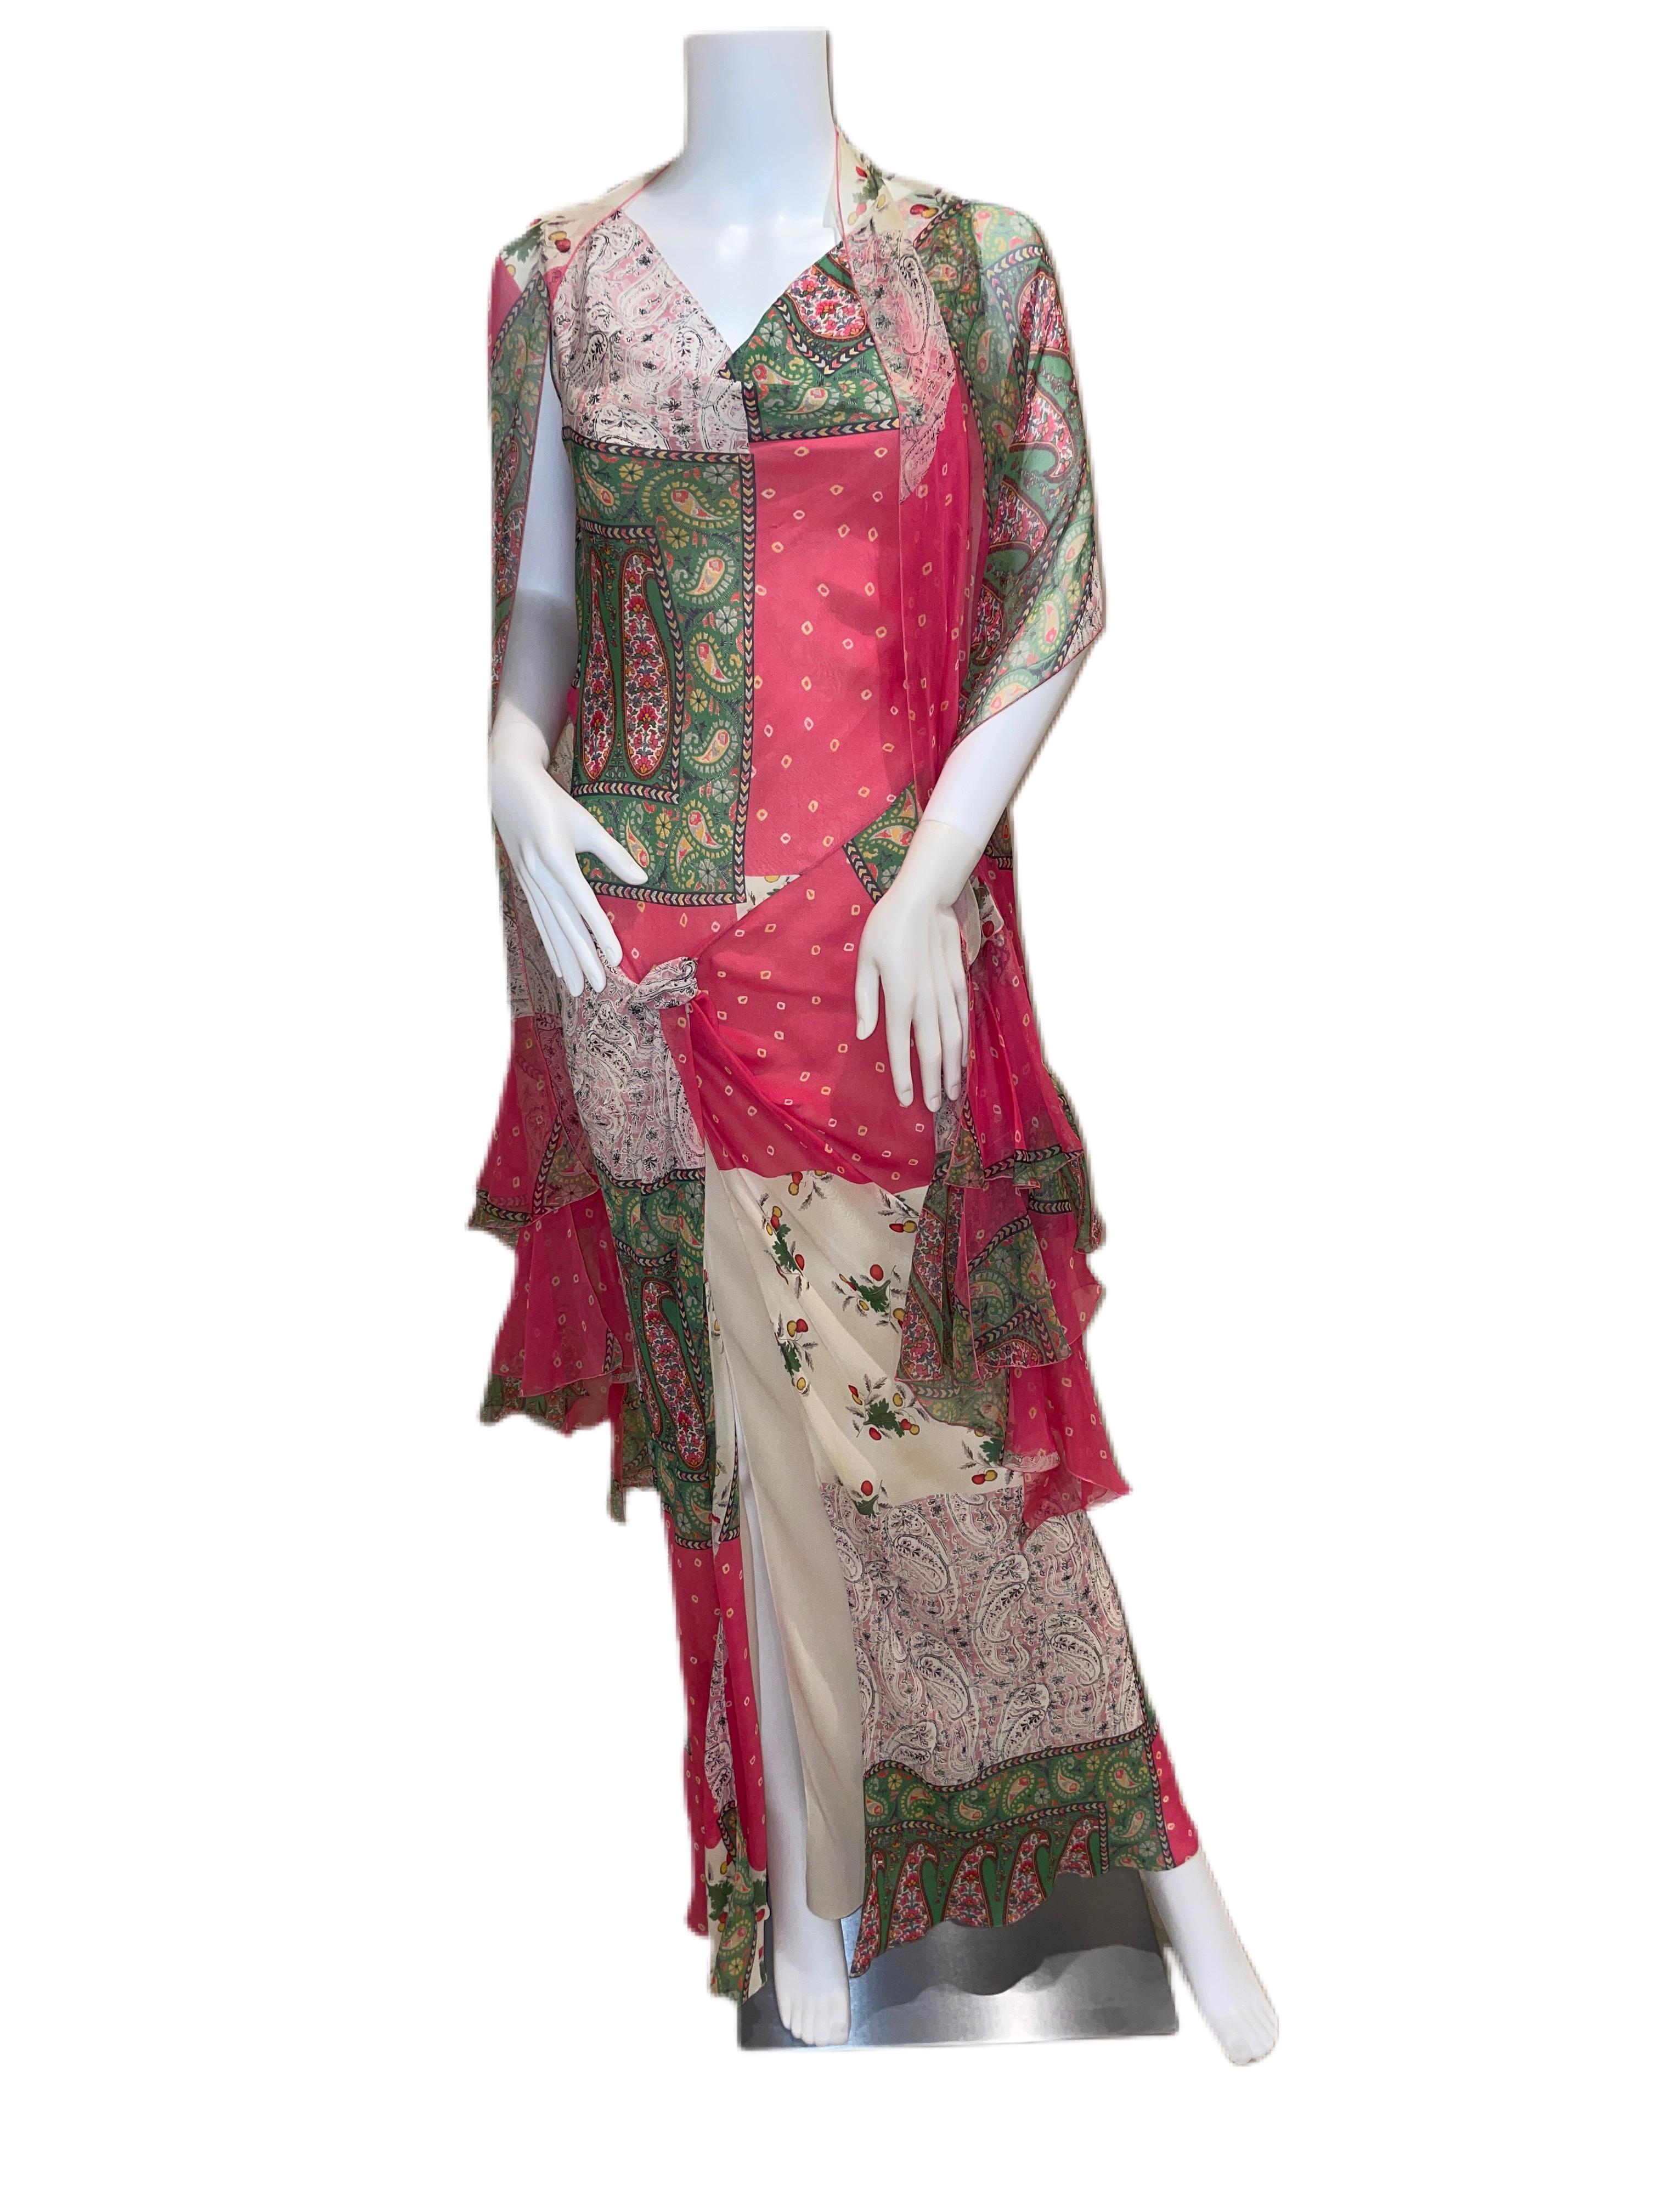 Vintage SS04 2004 John Galliano for Christian Dior maxi gown with matching shawl in paisley print. 100% silk and F40 fitting a M/L. Never worn and completely flawless. This runway print long dress also features a cowl neck, a low back, and a thigh